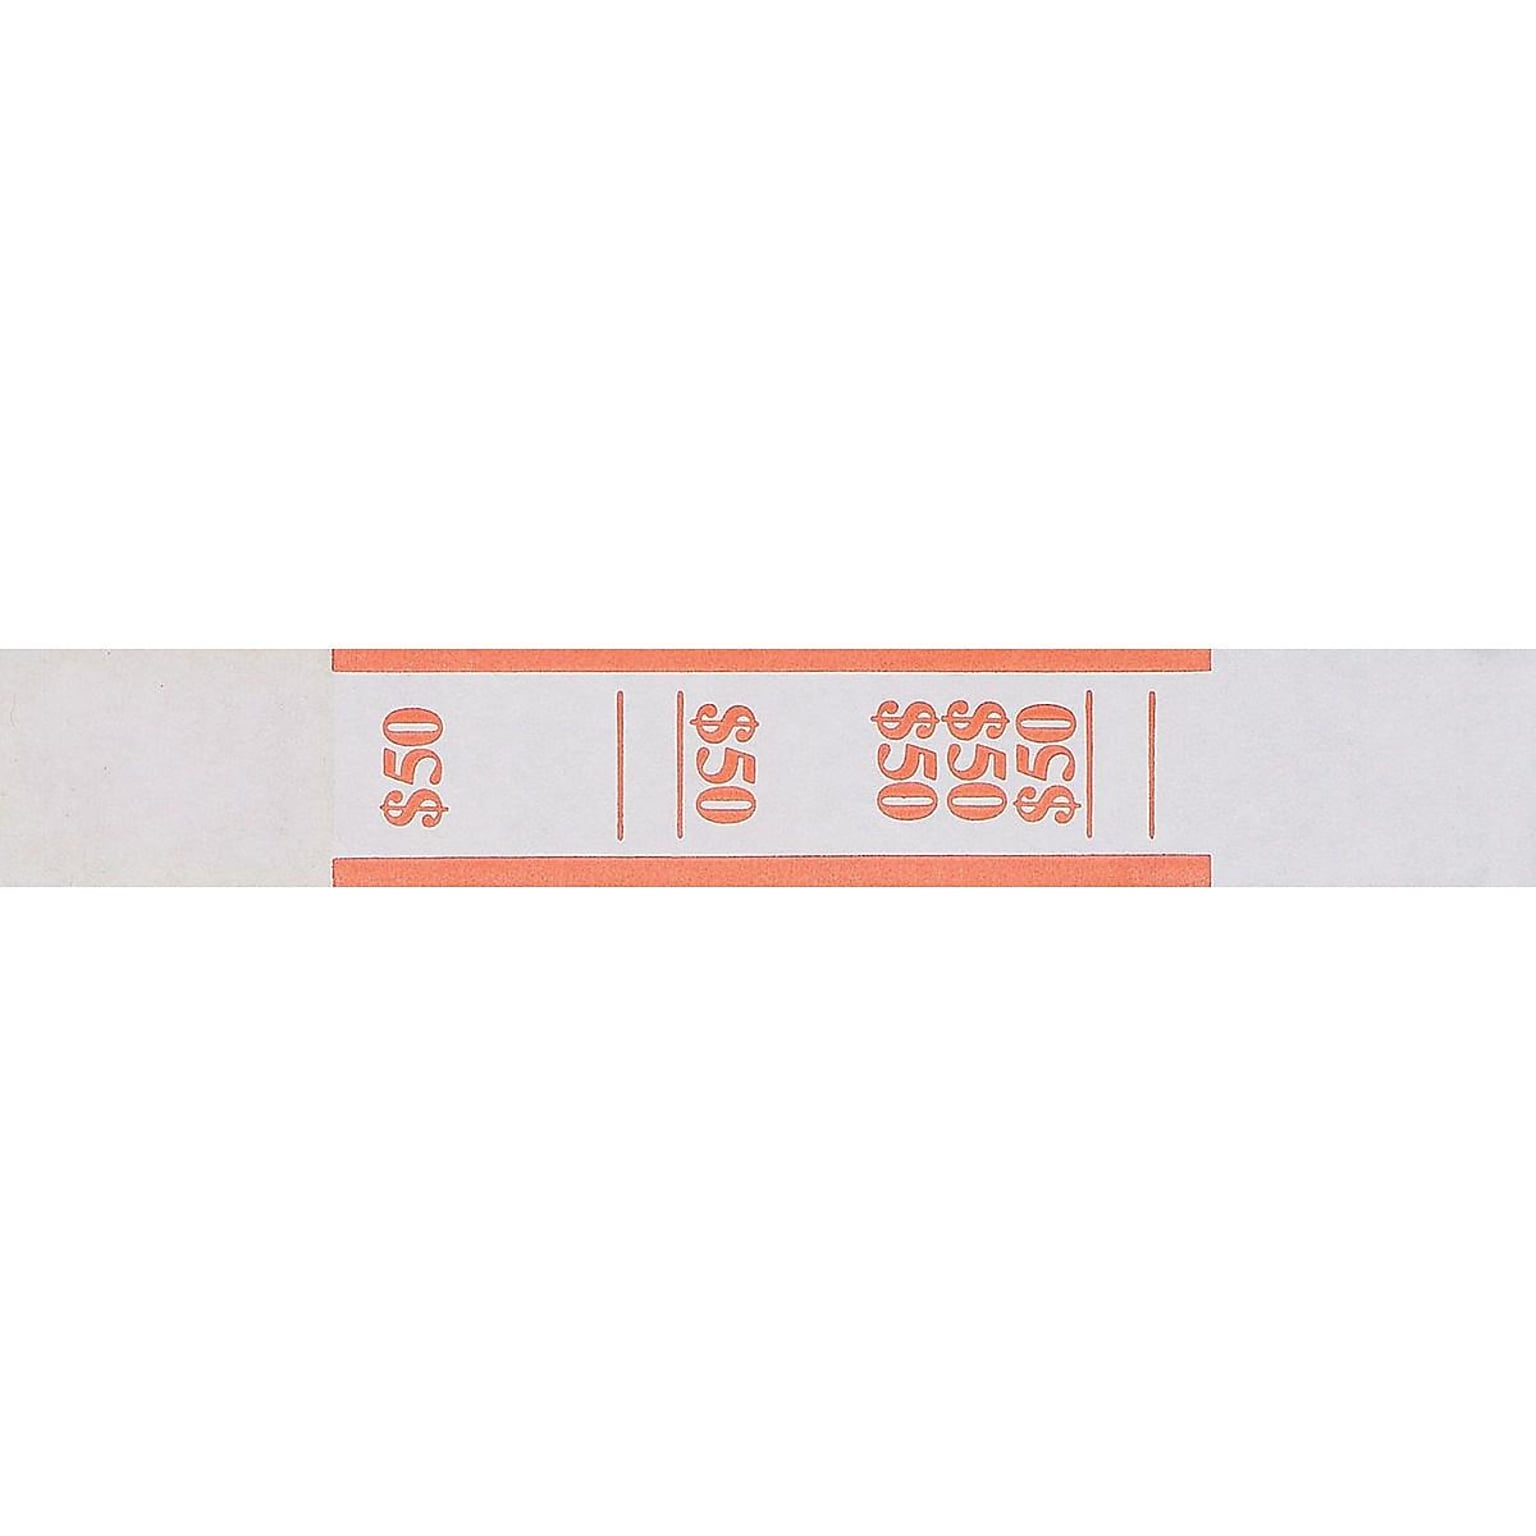 Pap-R Products Currency Straps, Orange/White, 1000/Pack (400050)